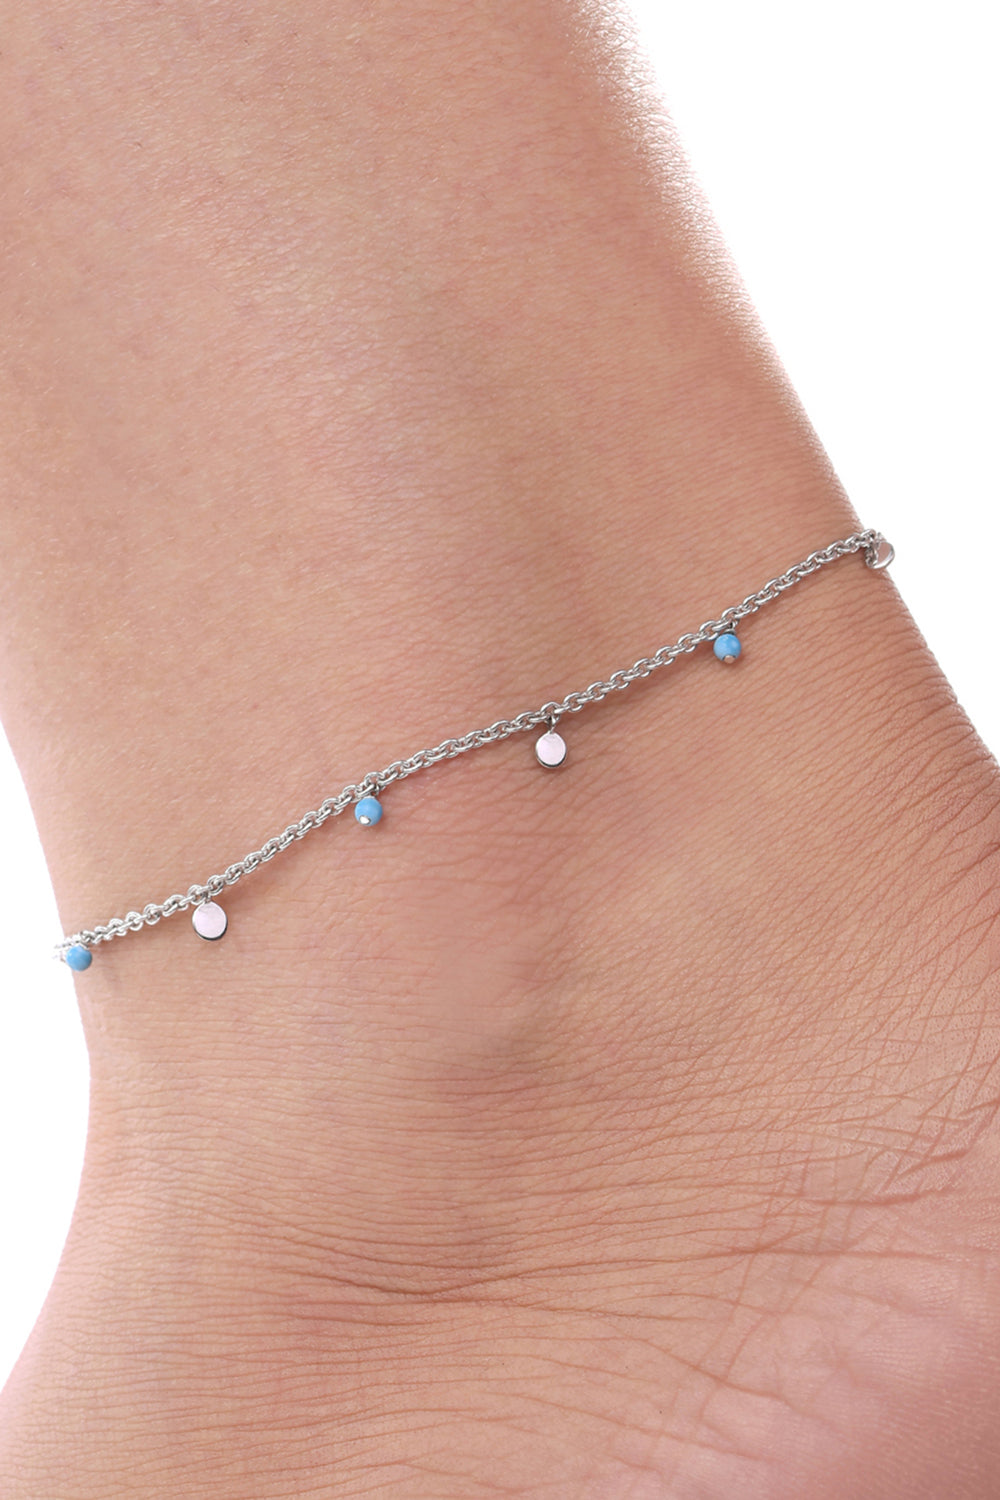 Turquoise Bead Chain 14KT Gold Anklet